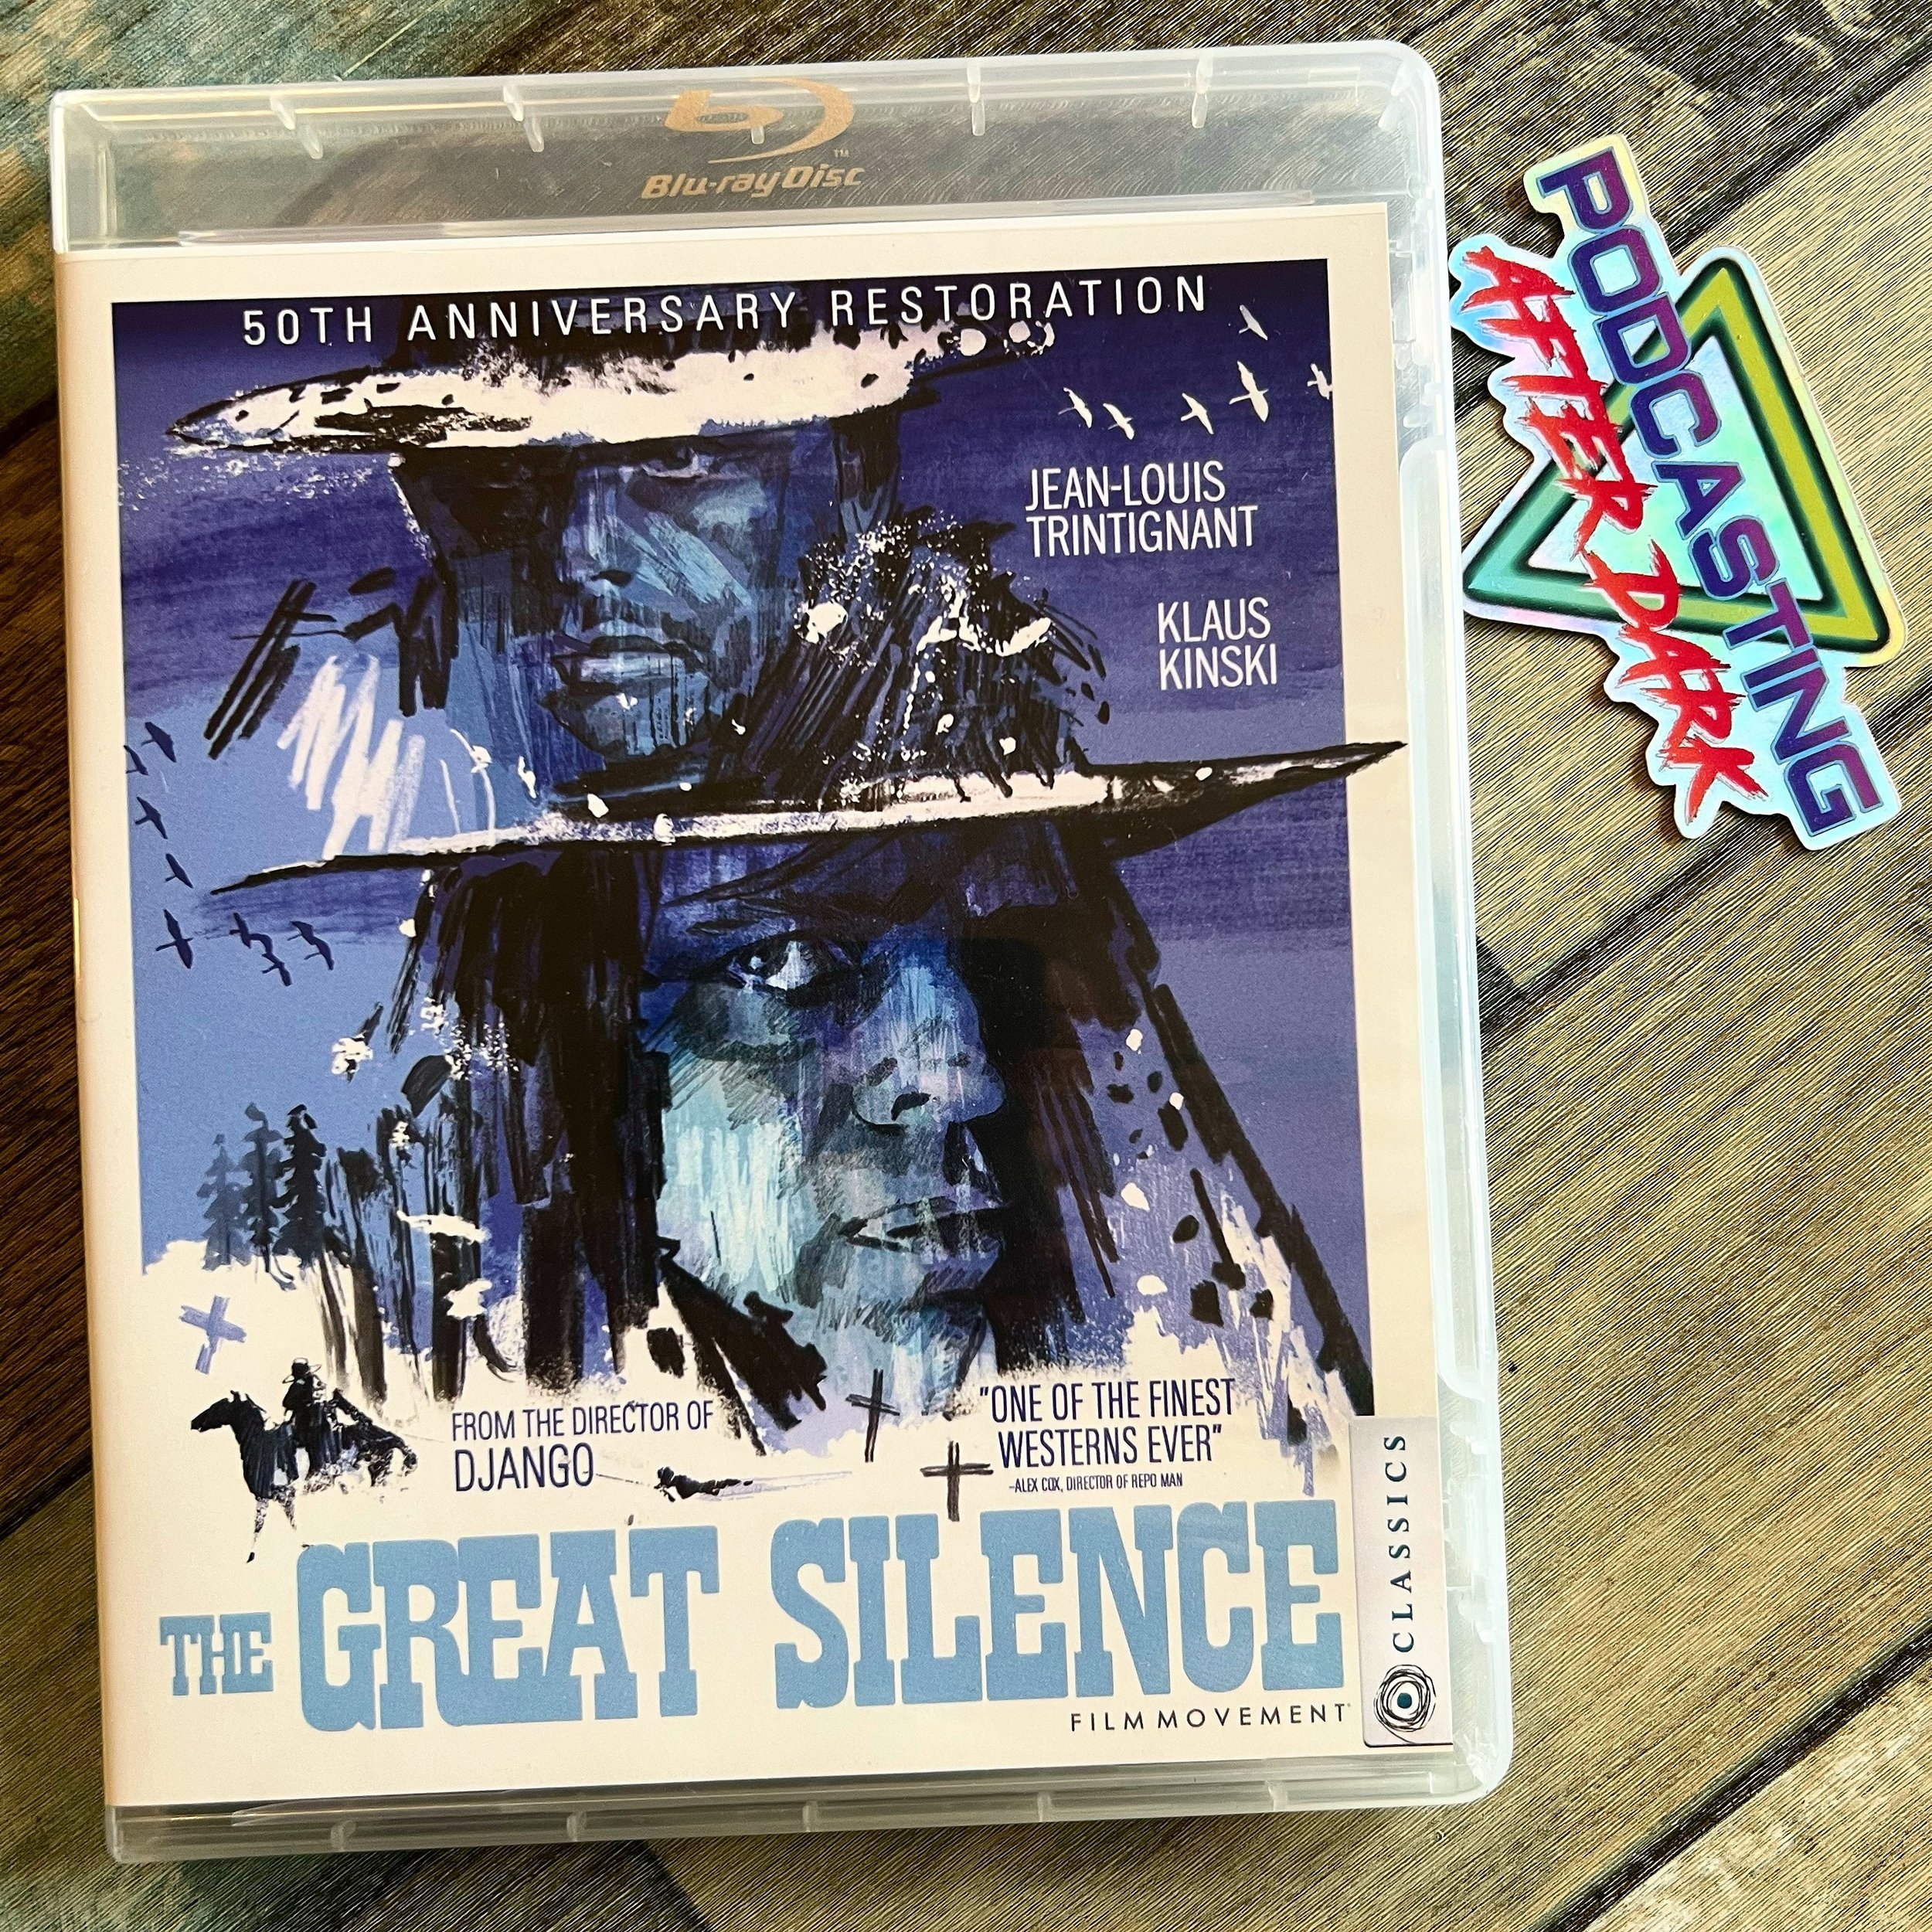 We&rsquo;re recording our review of THE GREAT SILENCE (1968) tonight starring Klaus Kinski! Who&rsquo;s a fan of the spaghetti western? Leave a comment below! 
&mdash;&mdash;&mdash;&mdash;&mdash;&mdash;&mdash;&mdash;&mdash;&mdash;&mdash;&mdash; 
#Pod